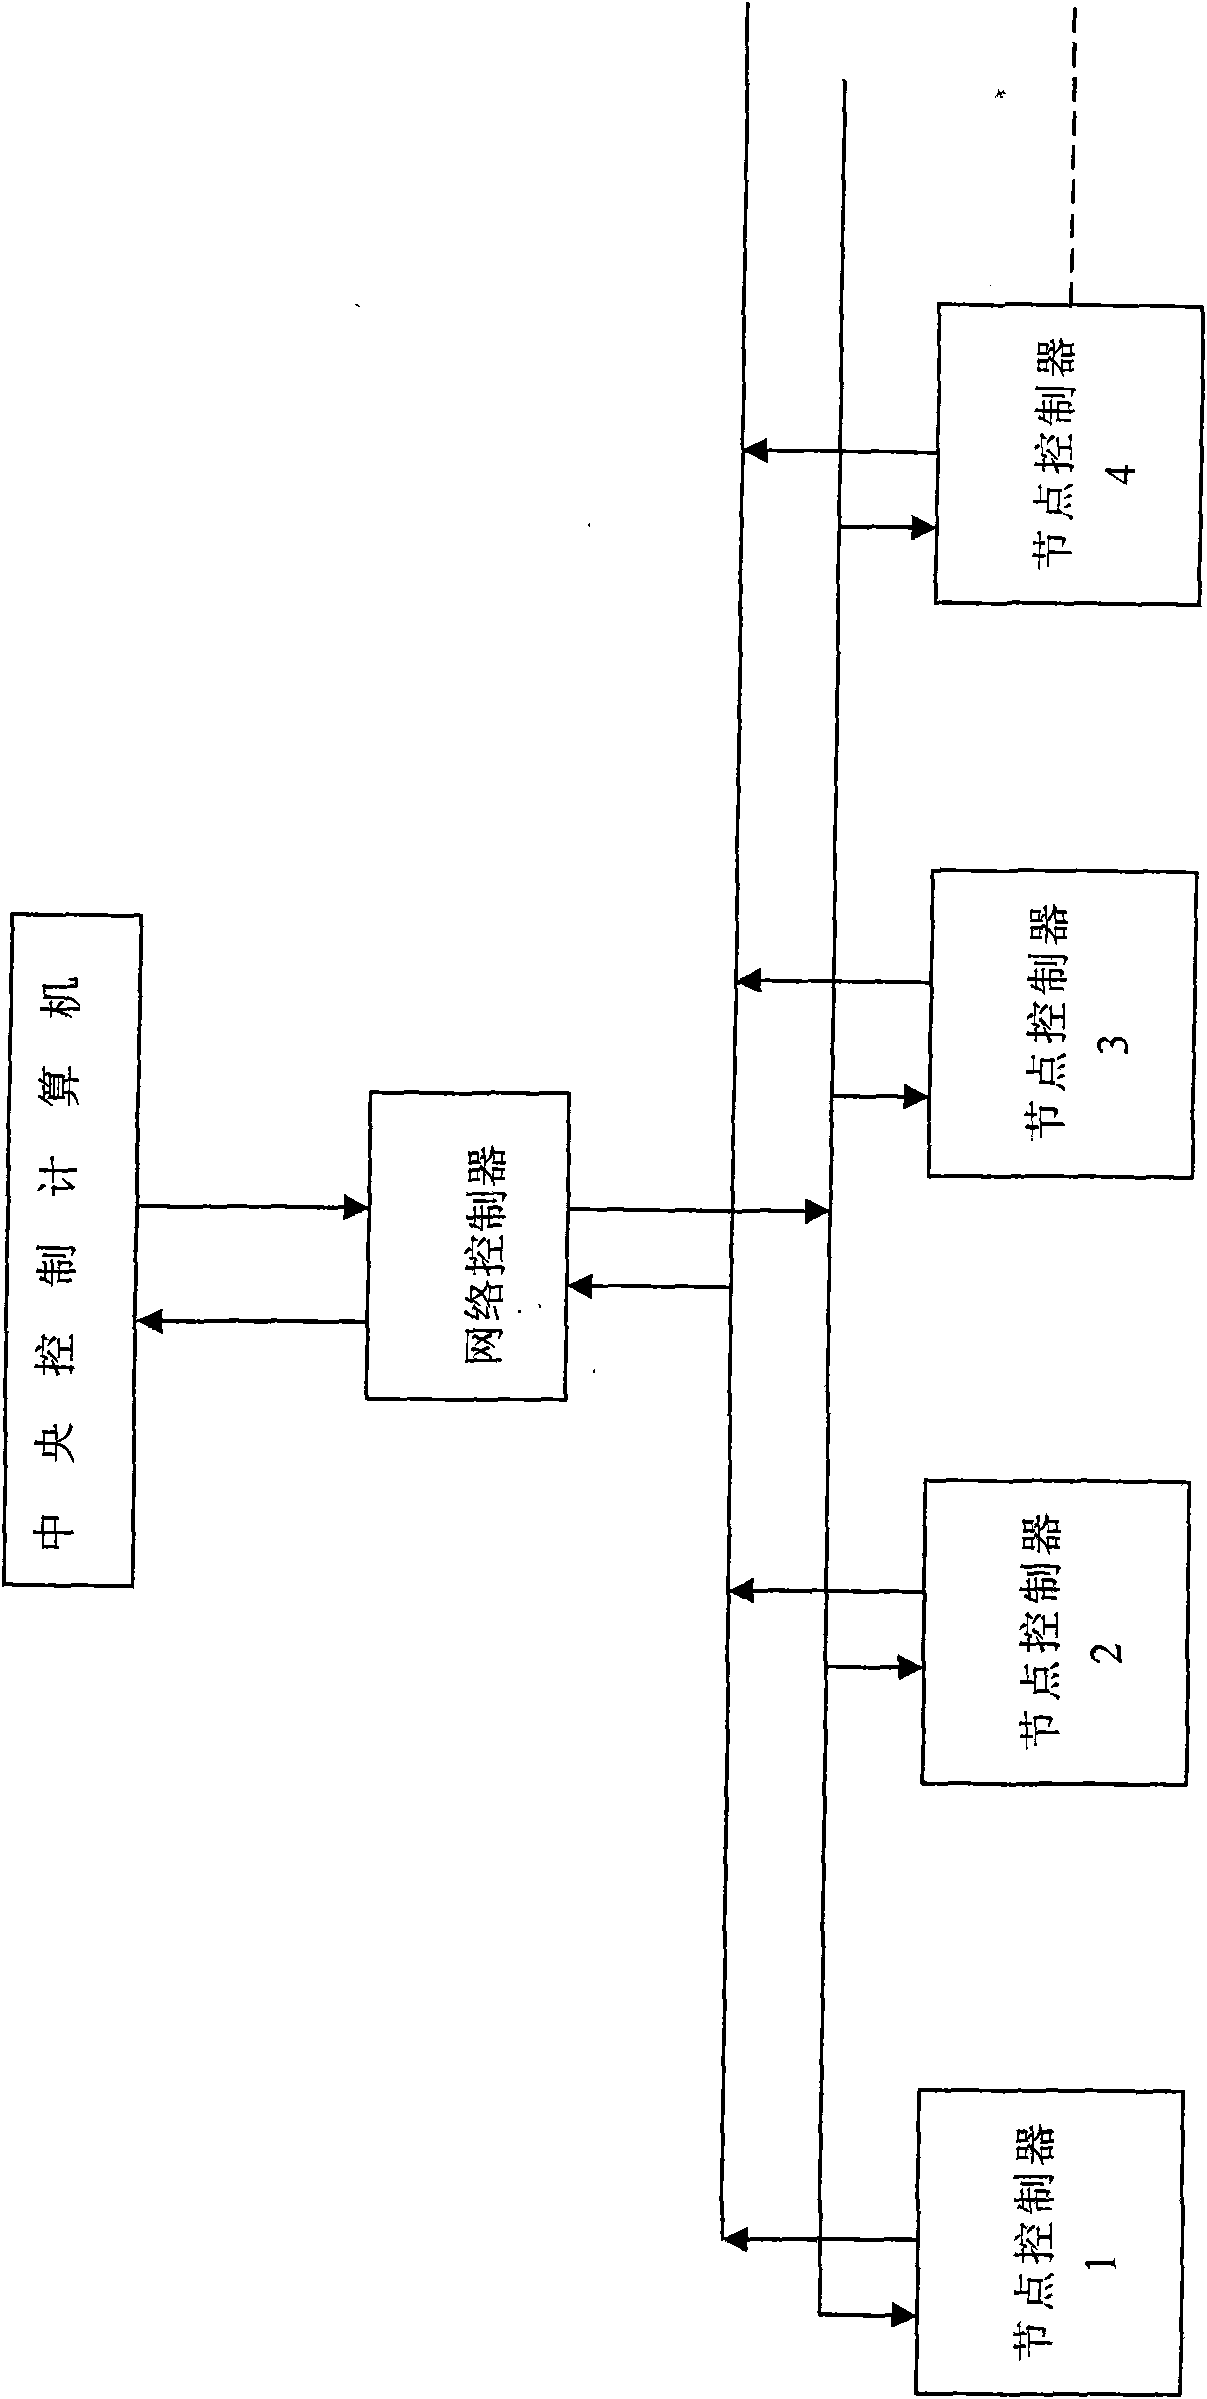 Implementation method of flexible intelligent direct current electric local area network electric power system